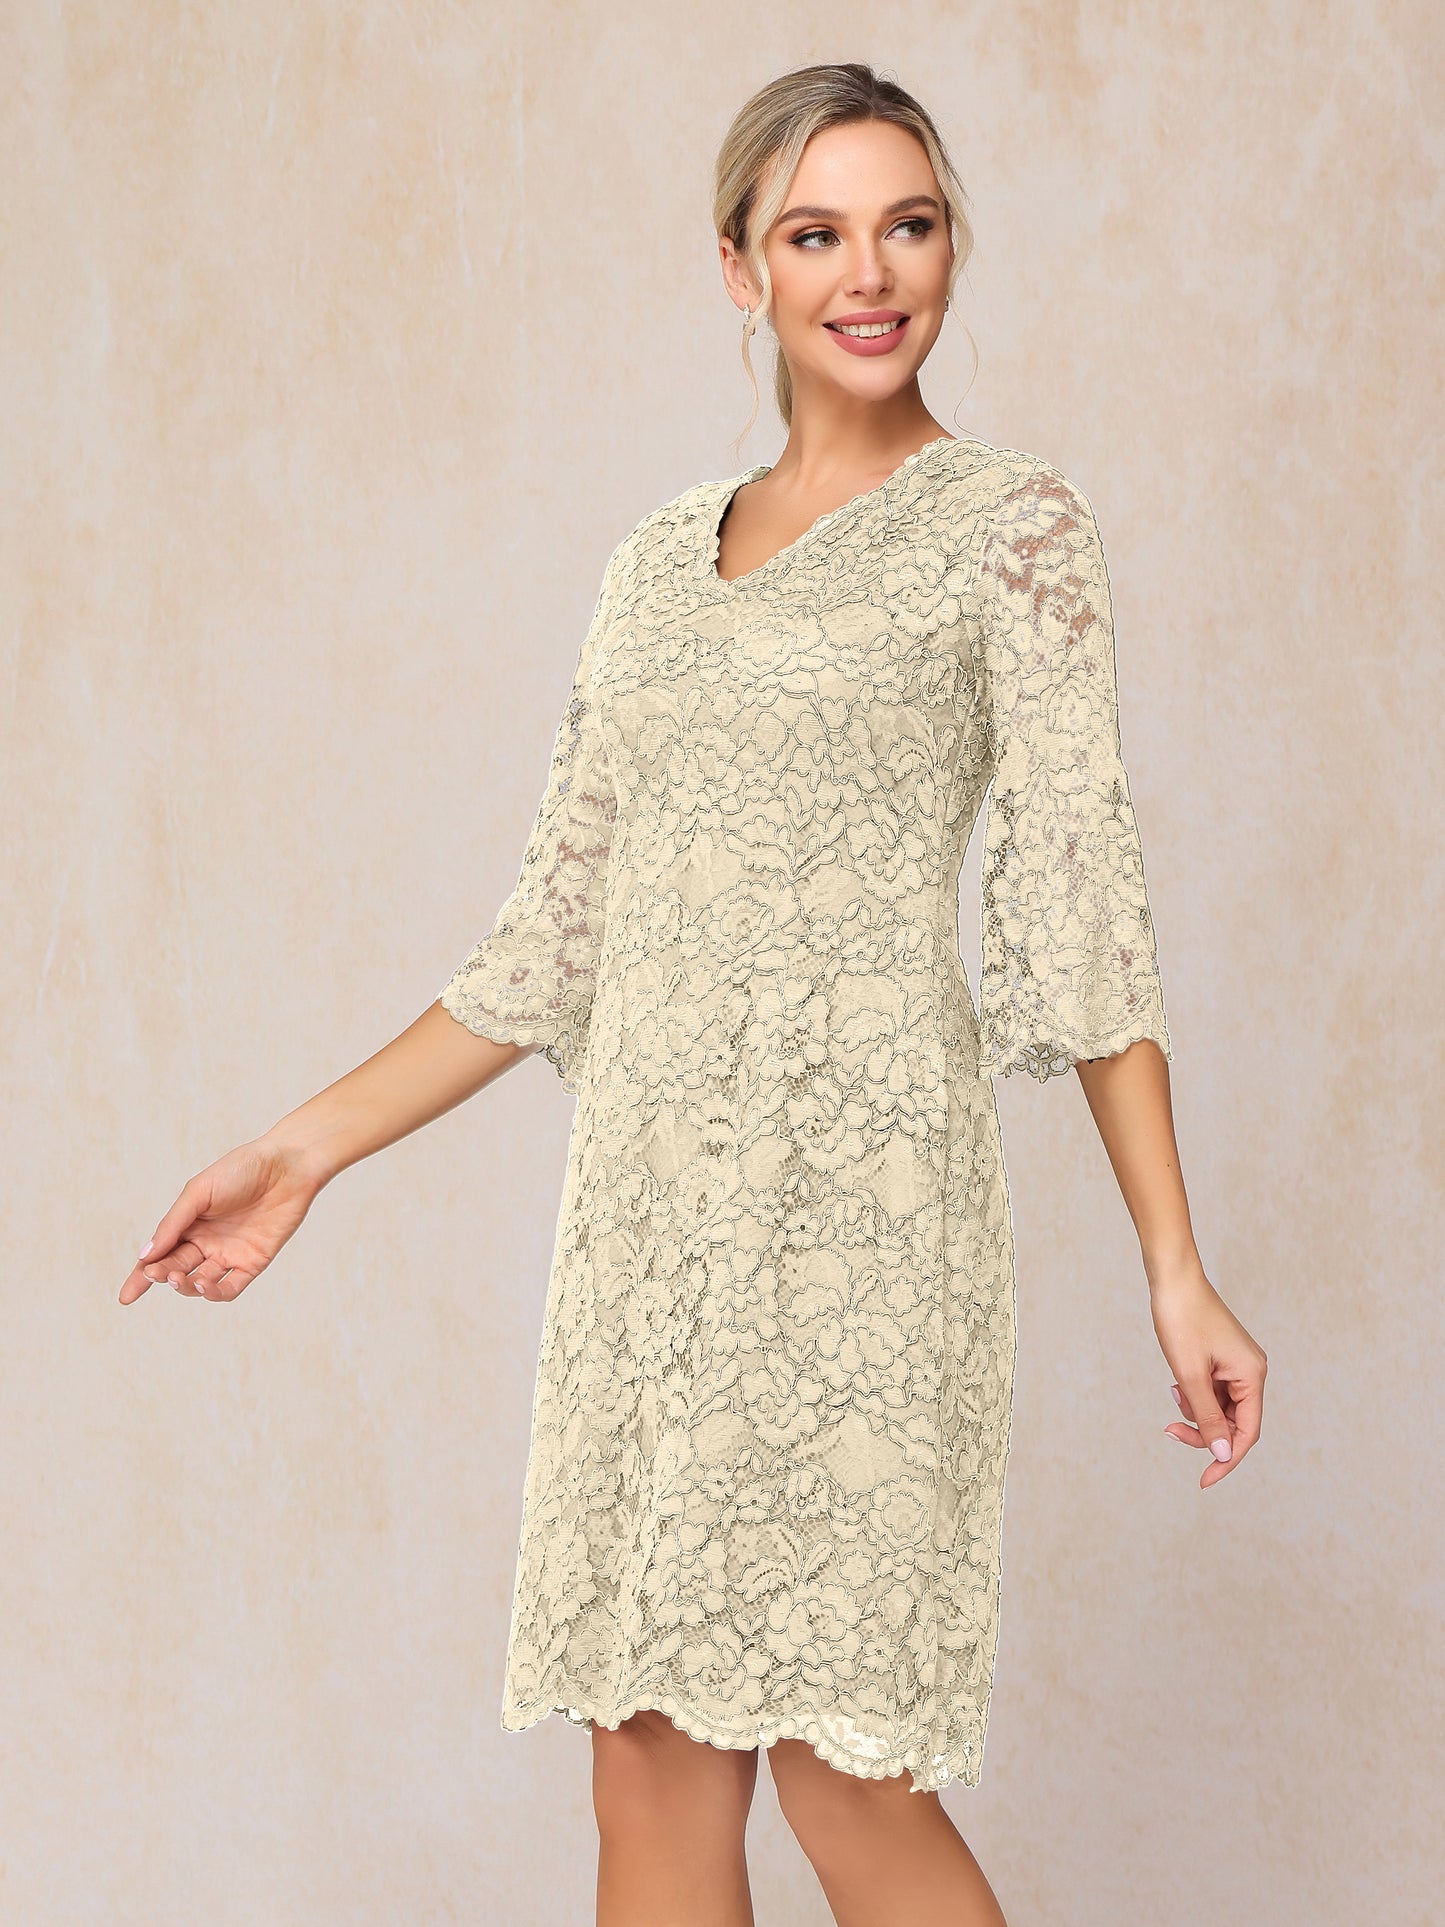 3/4 Sleeves Knee Length Lace Mother Of The Bride Dress